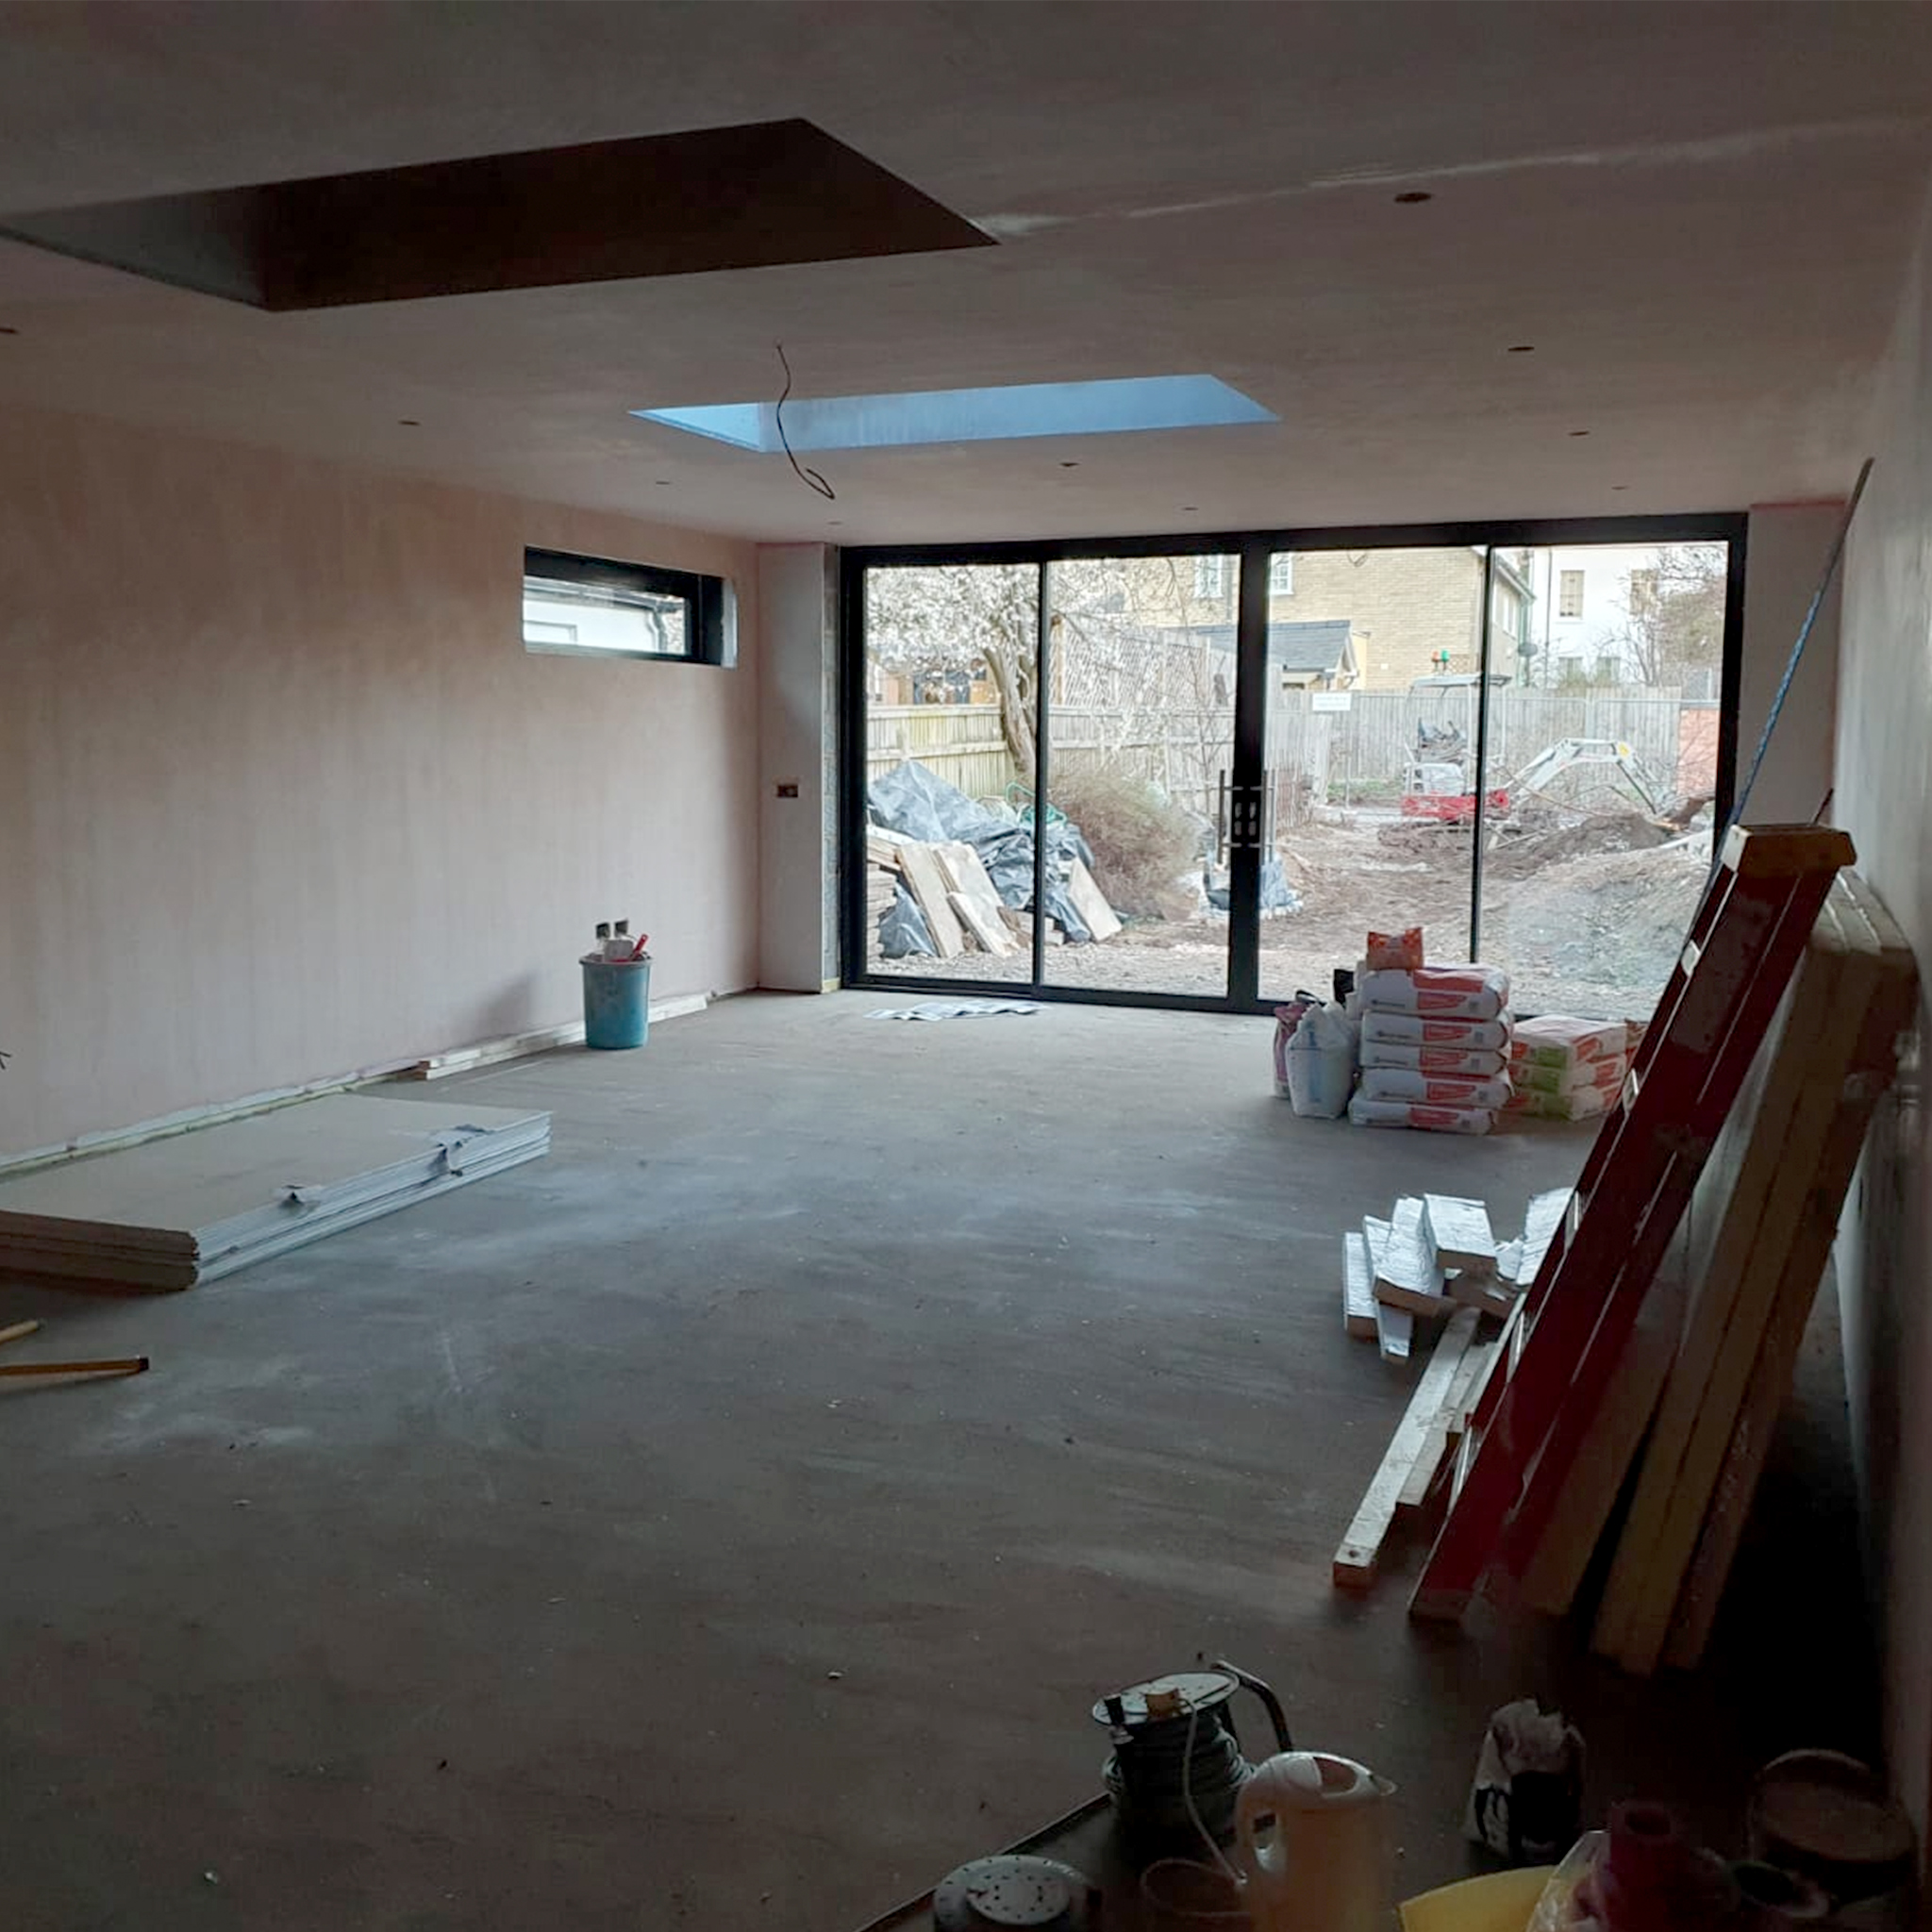 A photo of the interior of the extension with the large sliding glass doors in place, but the kitchen still under construction. The image shows the open-plan living area with the natural light flooding in from the garden. Construction materials and tools are visible in the foreground, giving viewers a sense of the work that went into creating the finished space. This photo highlights the potential of the extension and gives viewers a glimpse of what the finished product will look like.